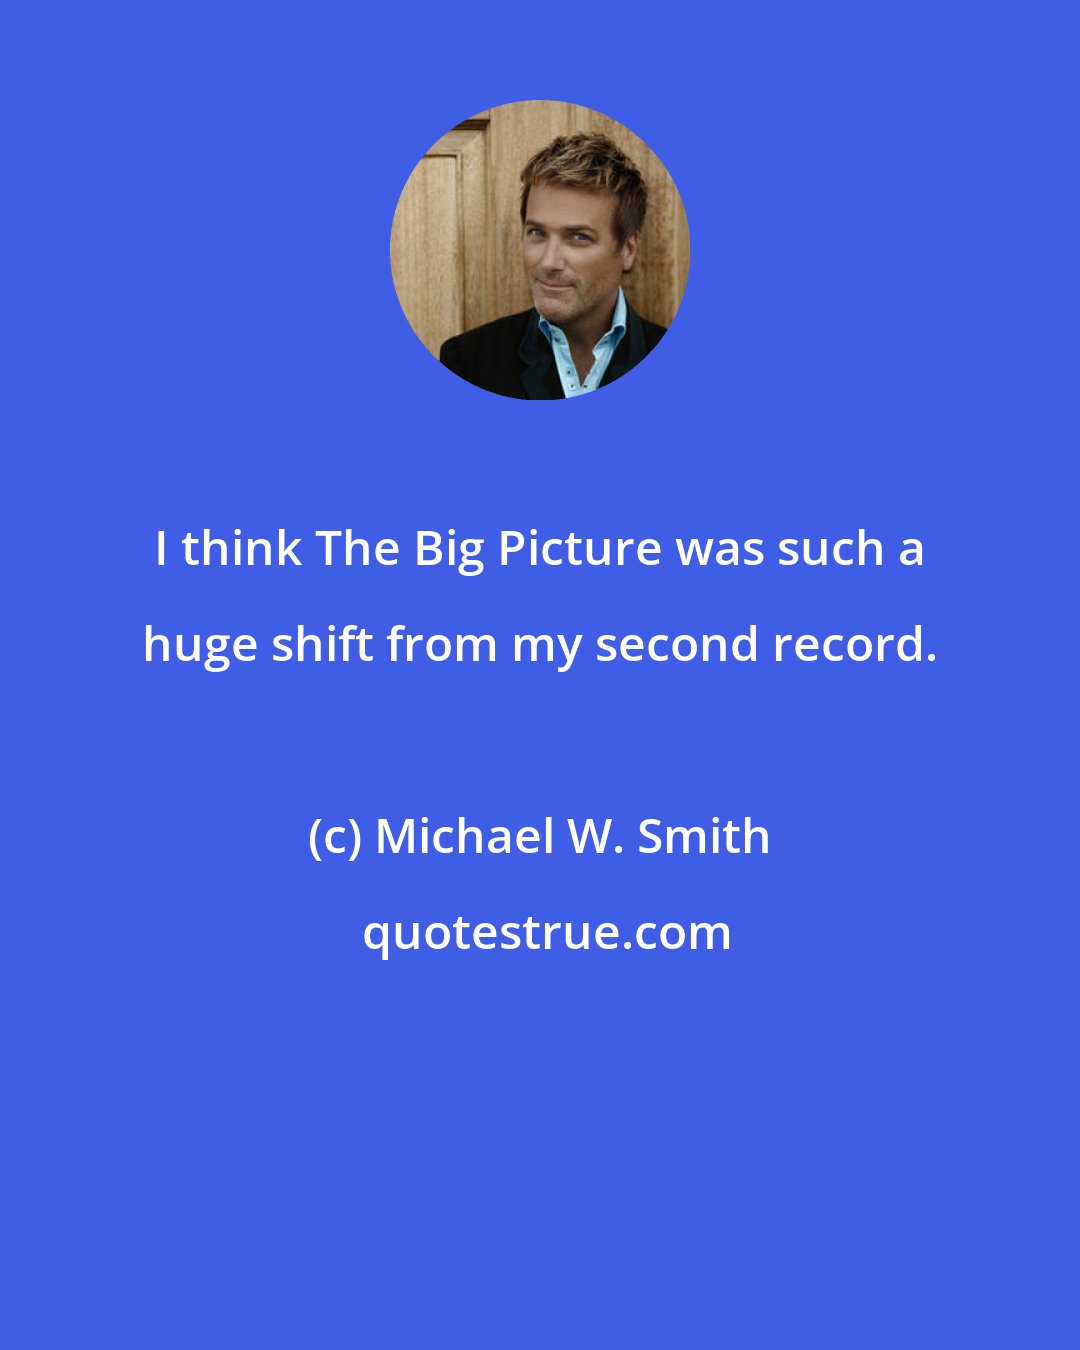 Michael W. Smith: I think The Big Picture was such a huge shift from my second record.